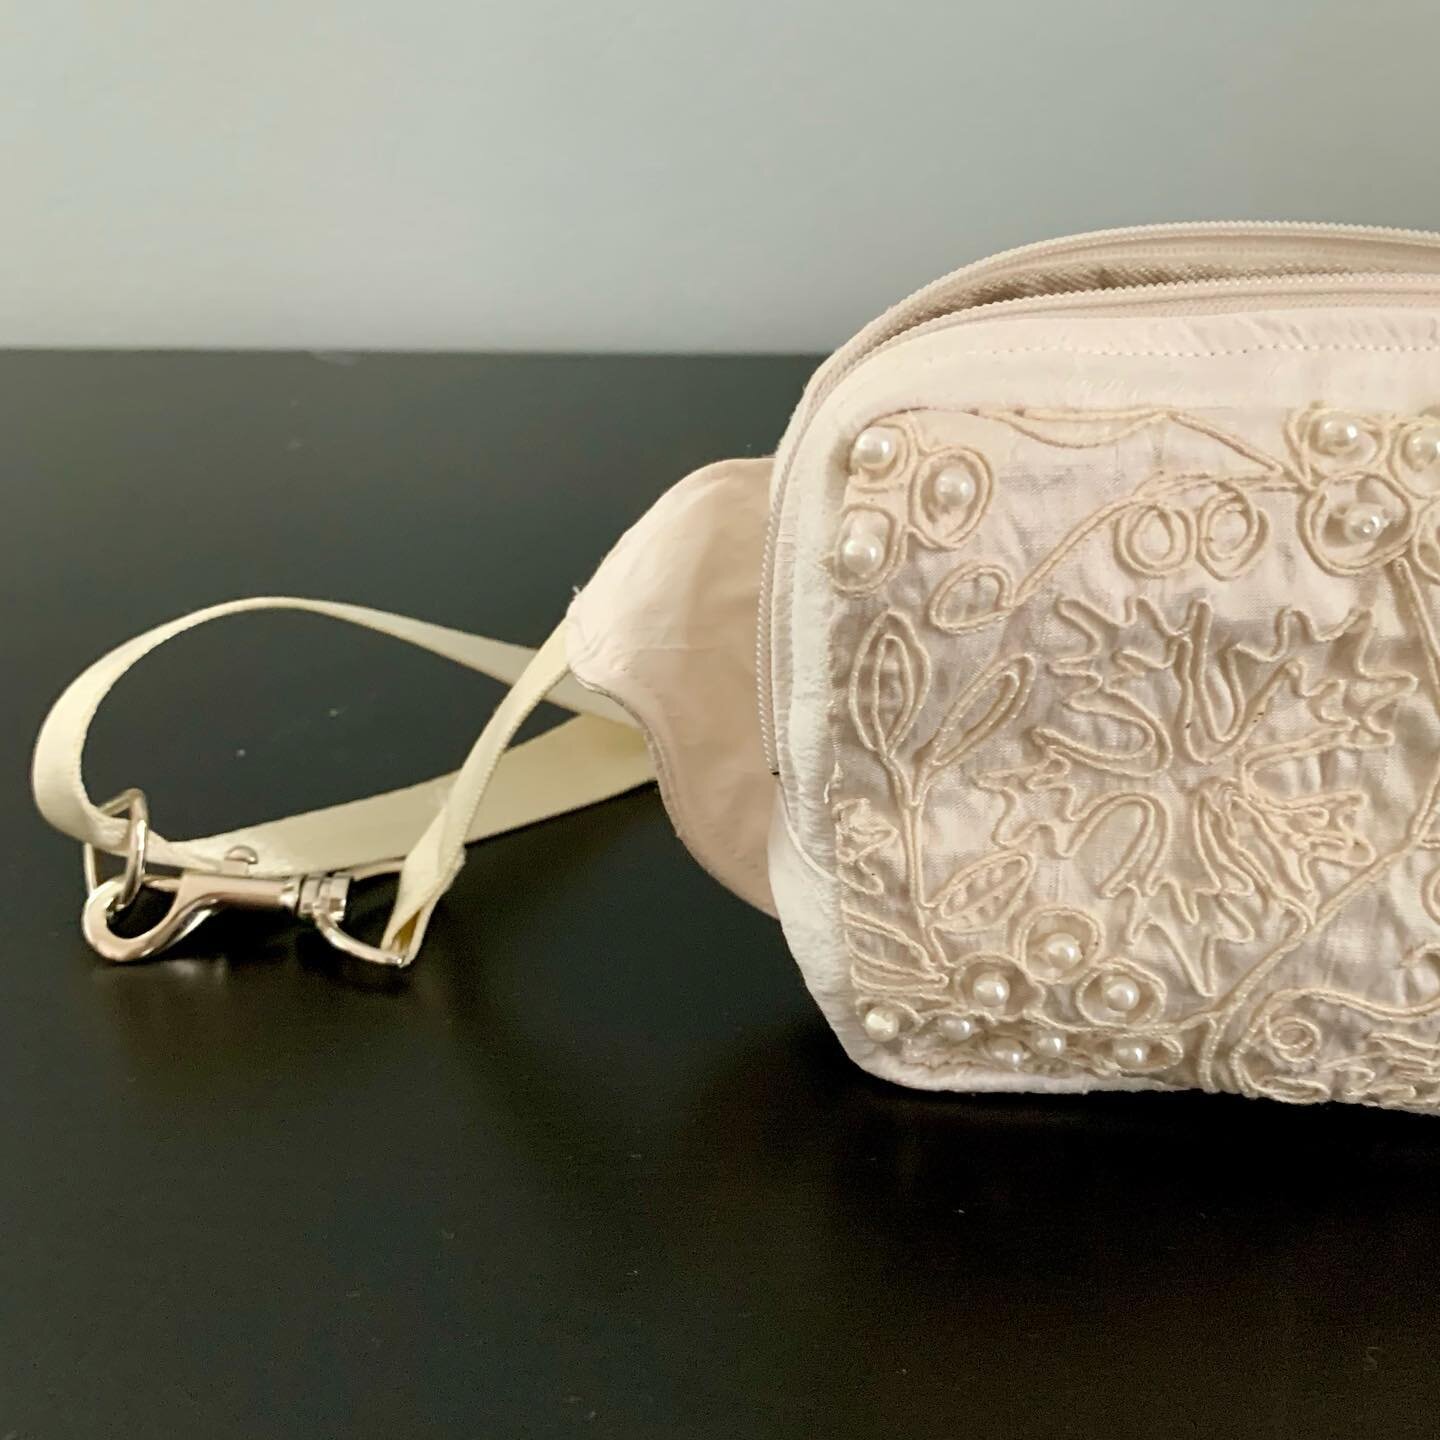 Fennel Fanny Pack in embellished silk for the bride-to-be in the family.  The  #fennelfannypack pattern by Sarah Kirsten is my go to for gifts so I made this fancy wedding day version for a shower present 🎁. Beaded silk dupioni front and back, plain